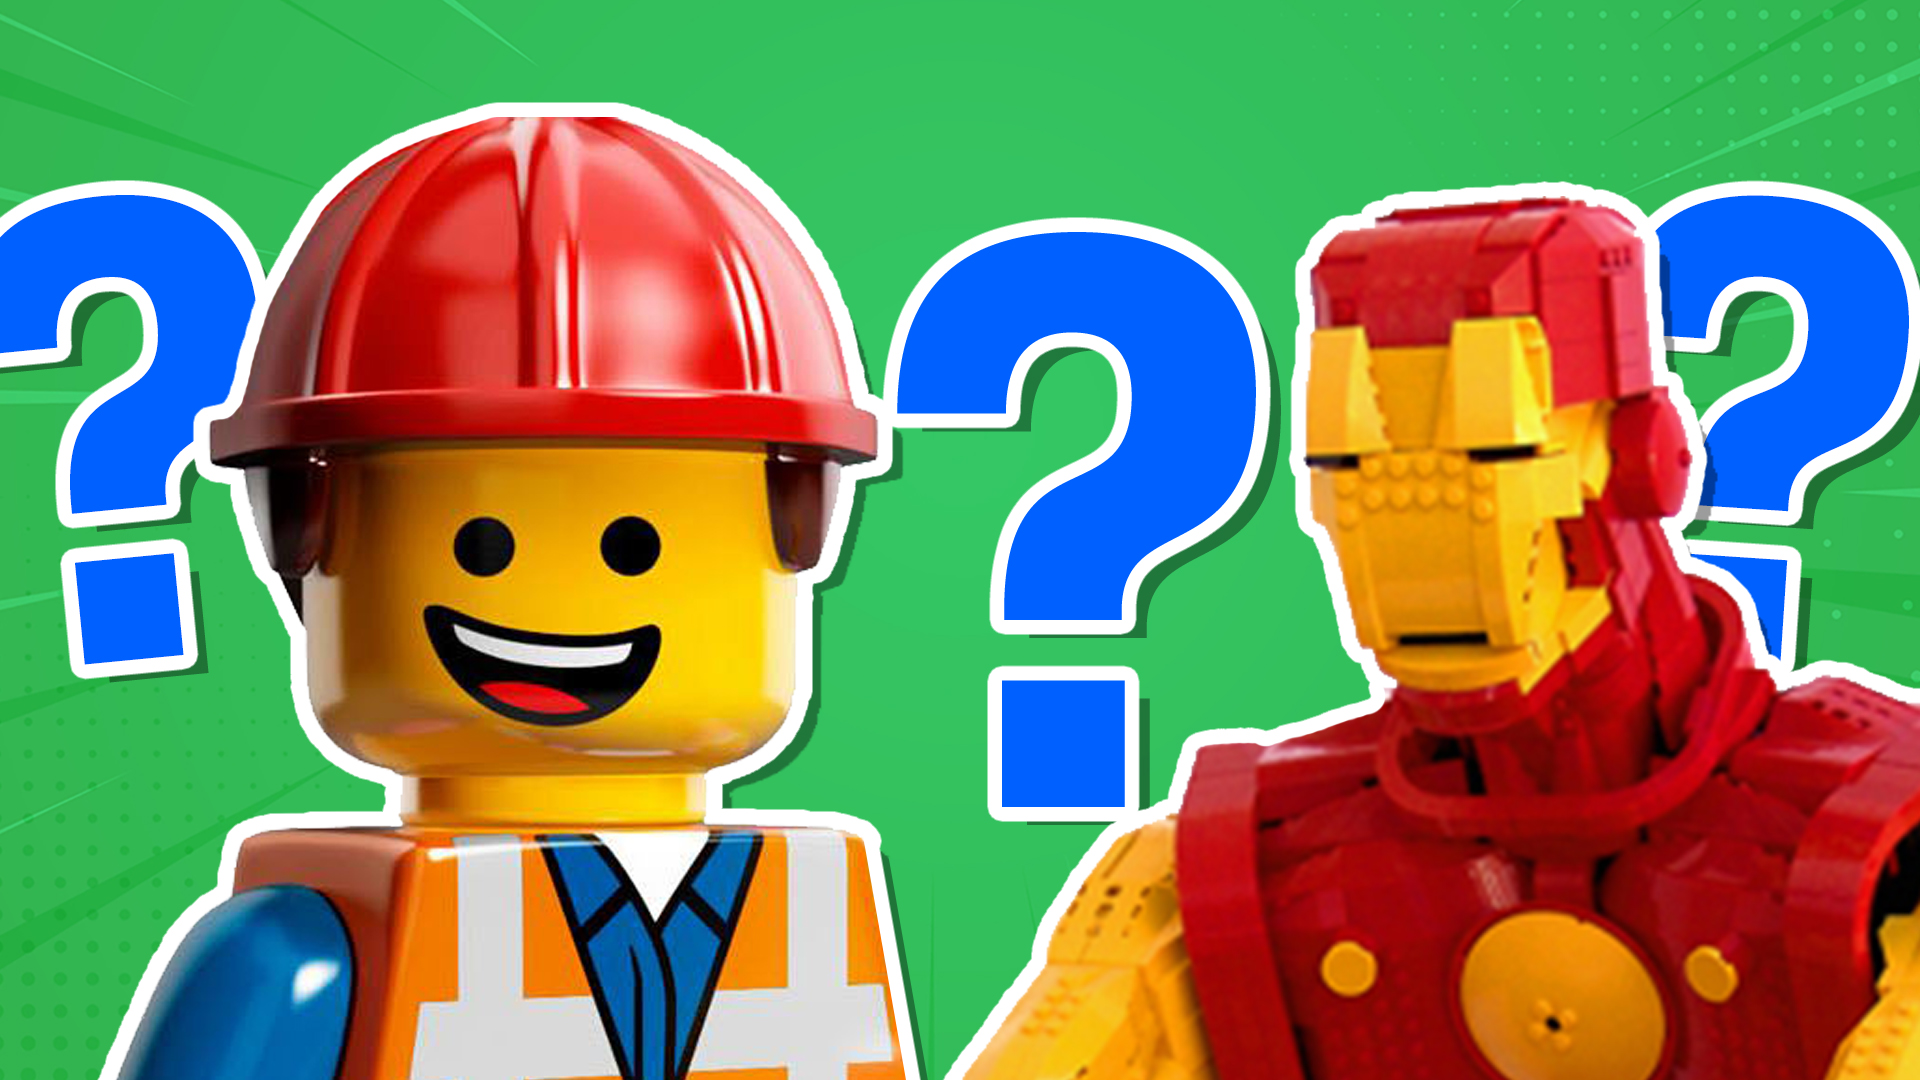 The Ultimate LEGO Quiz | Quizzes on Beano.com